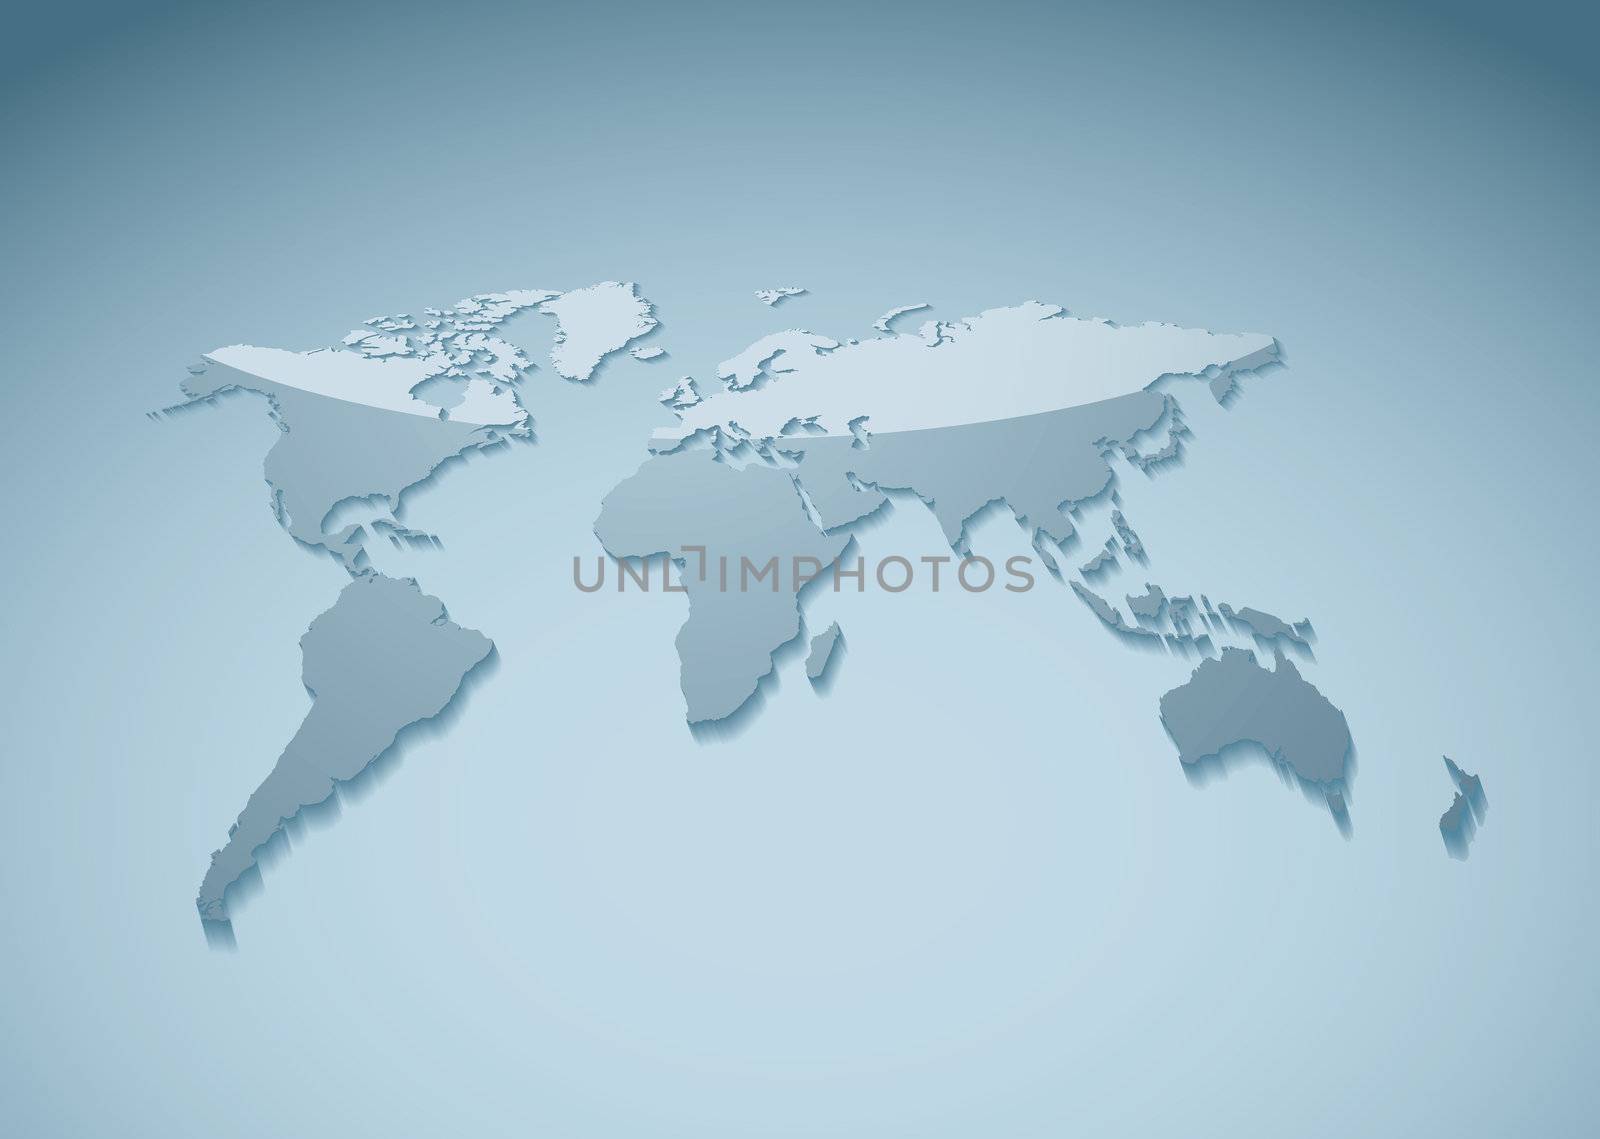 Ideal presentation background of the world with reflection